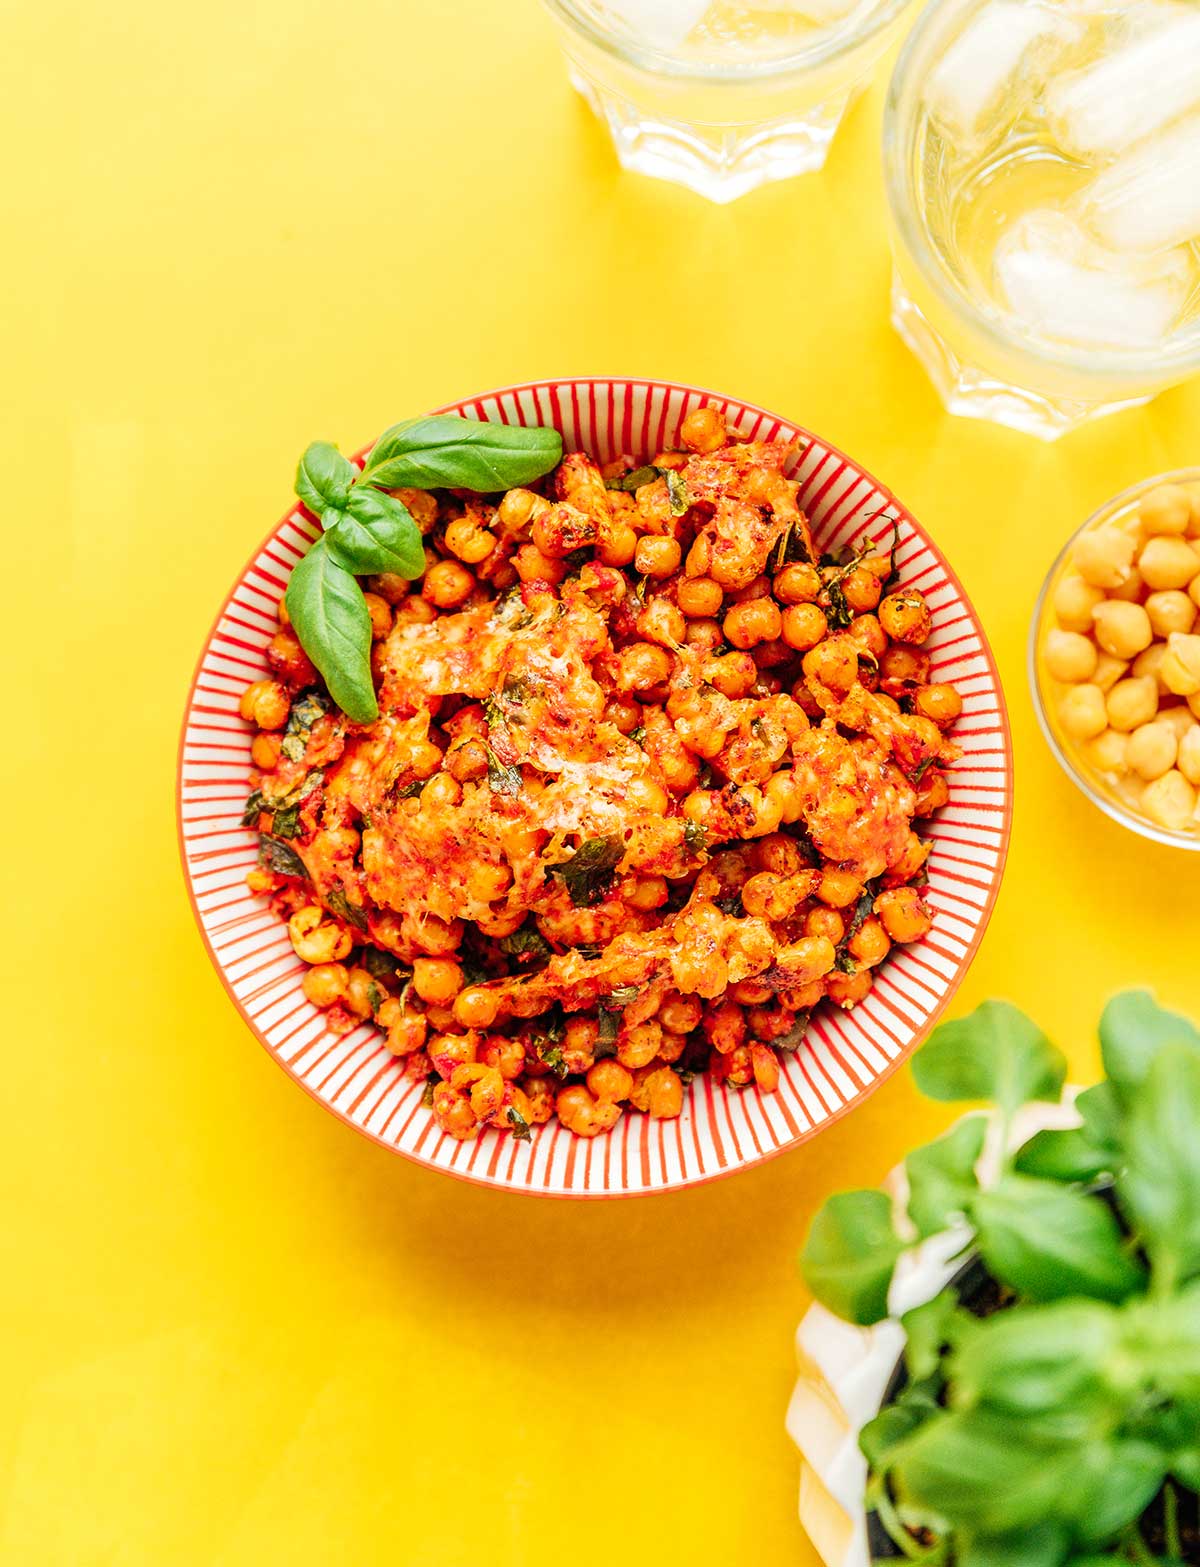 A bowl filled with pizza roasted chickpeas